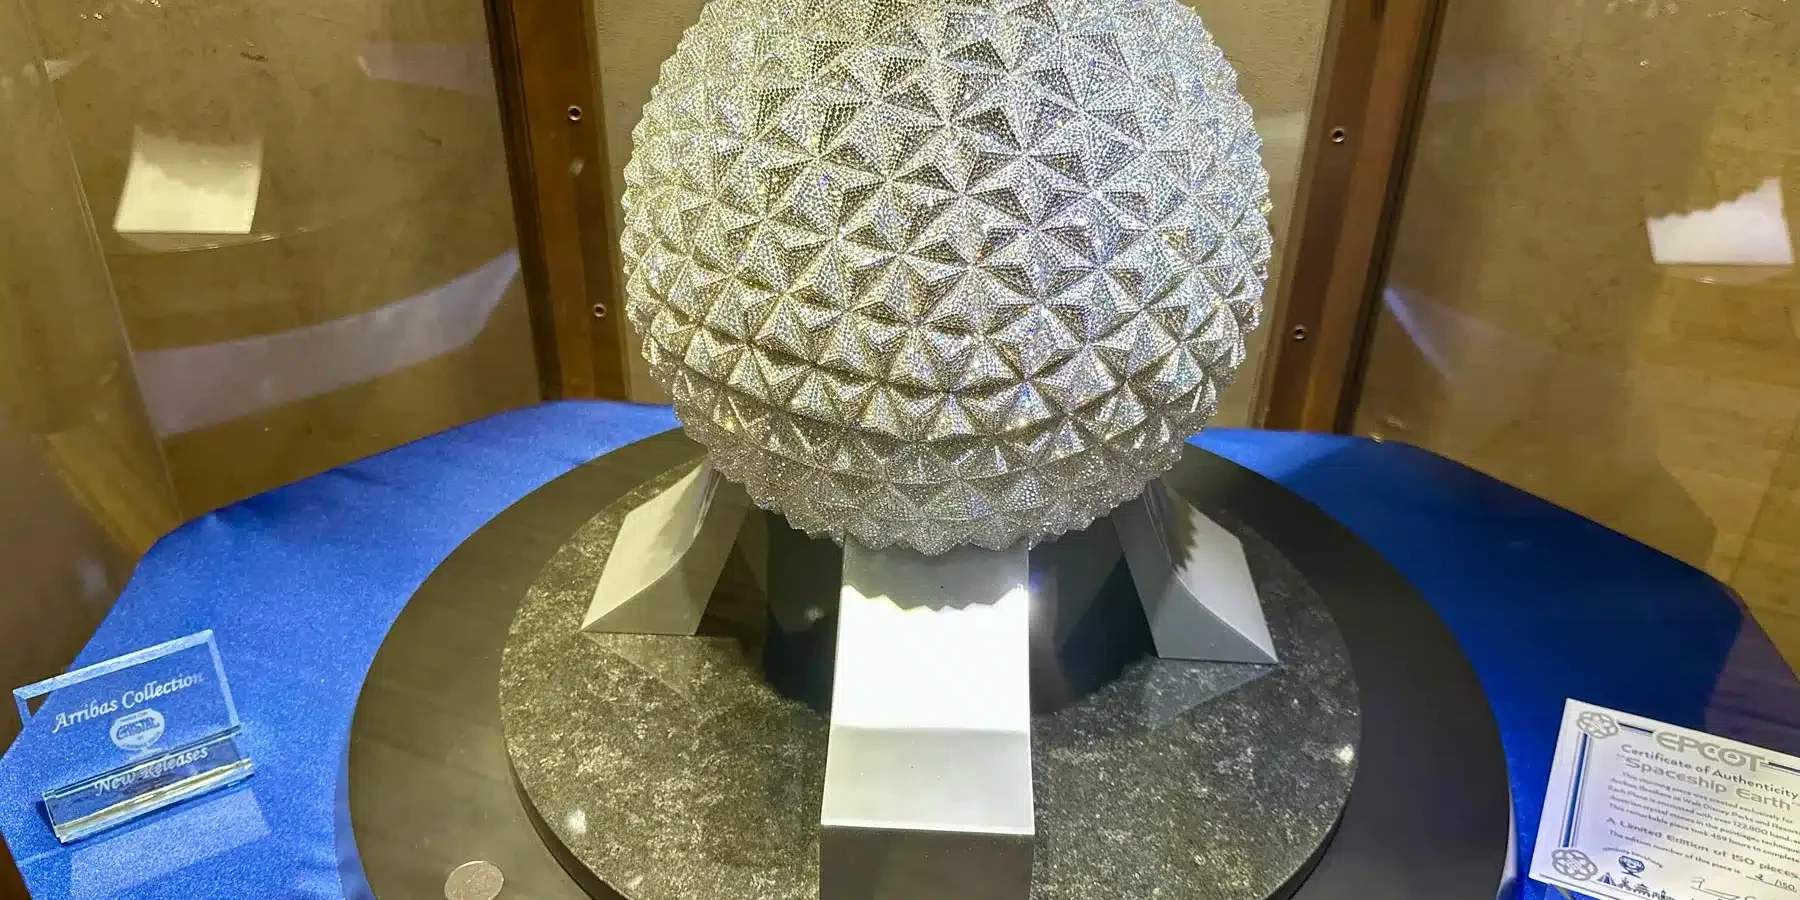 Spaceship Earth Crystal - Arribas Collection